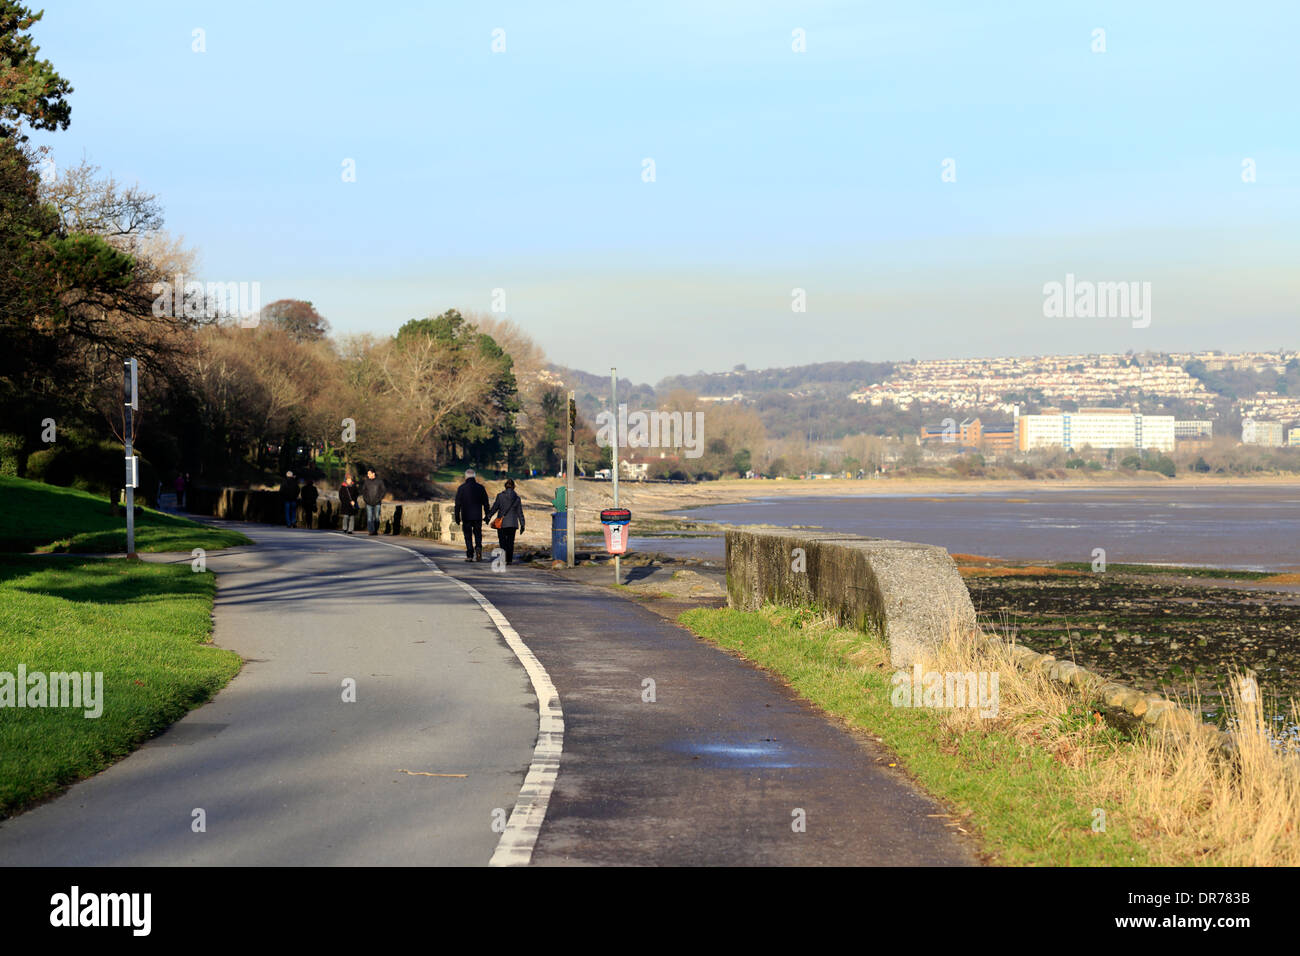 Seaside pedestrian path and cycle track between the South Wales city of Swansea and Mumbles resort village on Gower Peninsula. Stock Photo